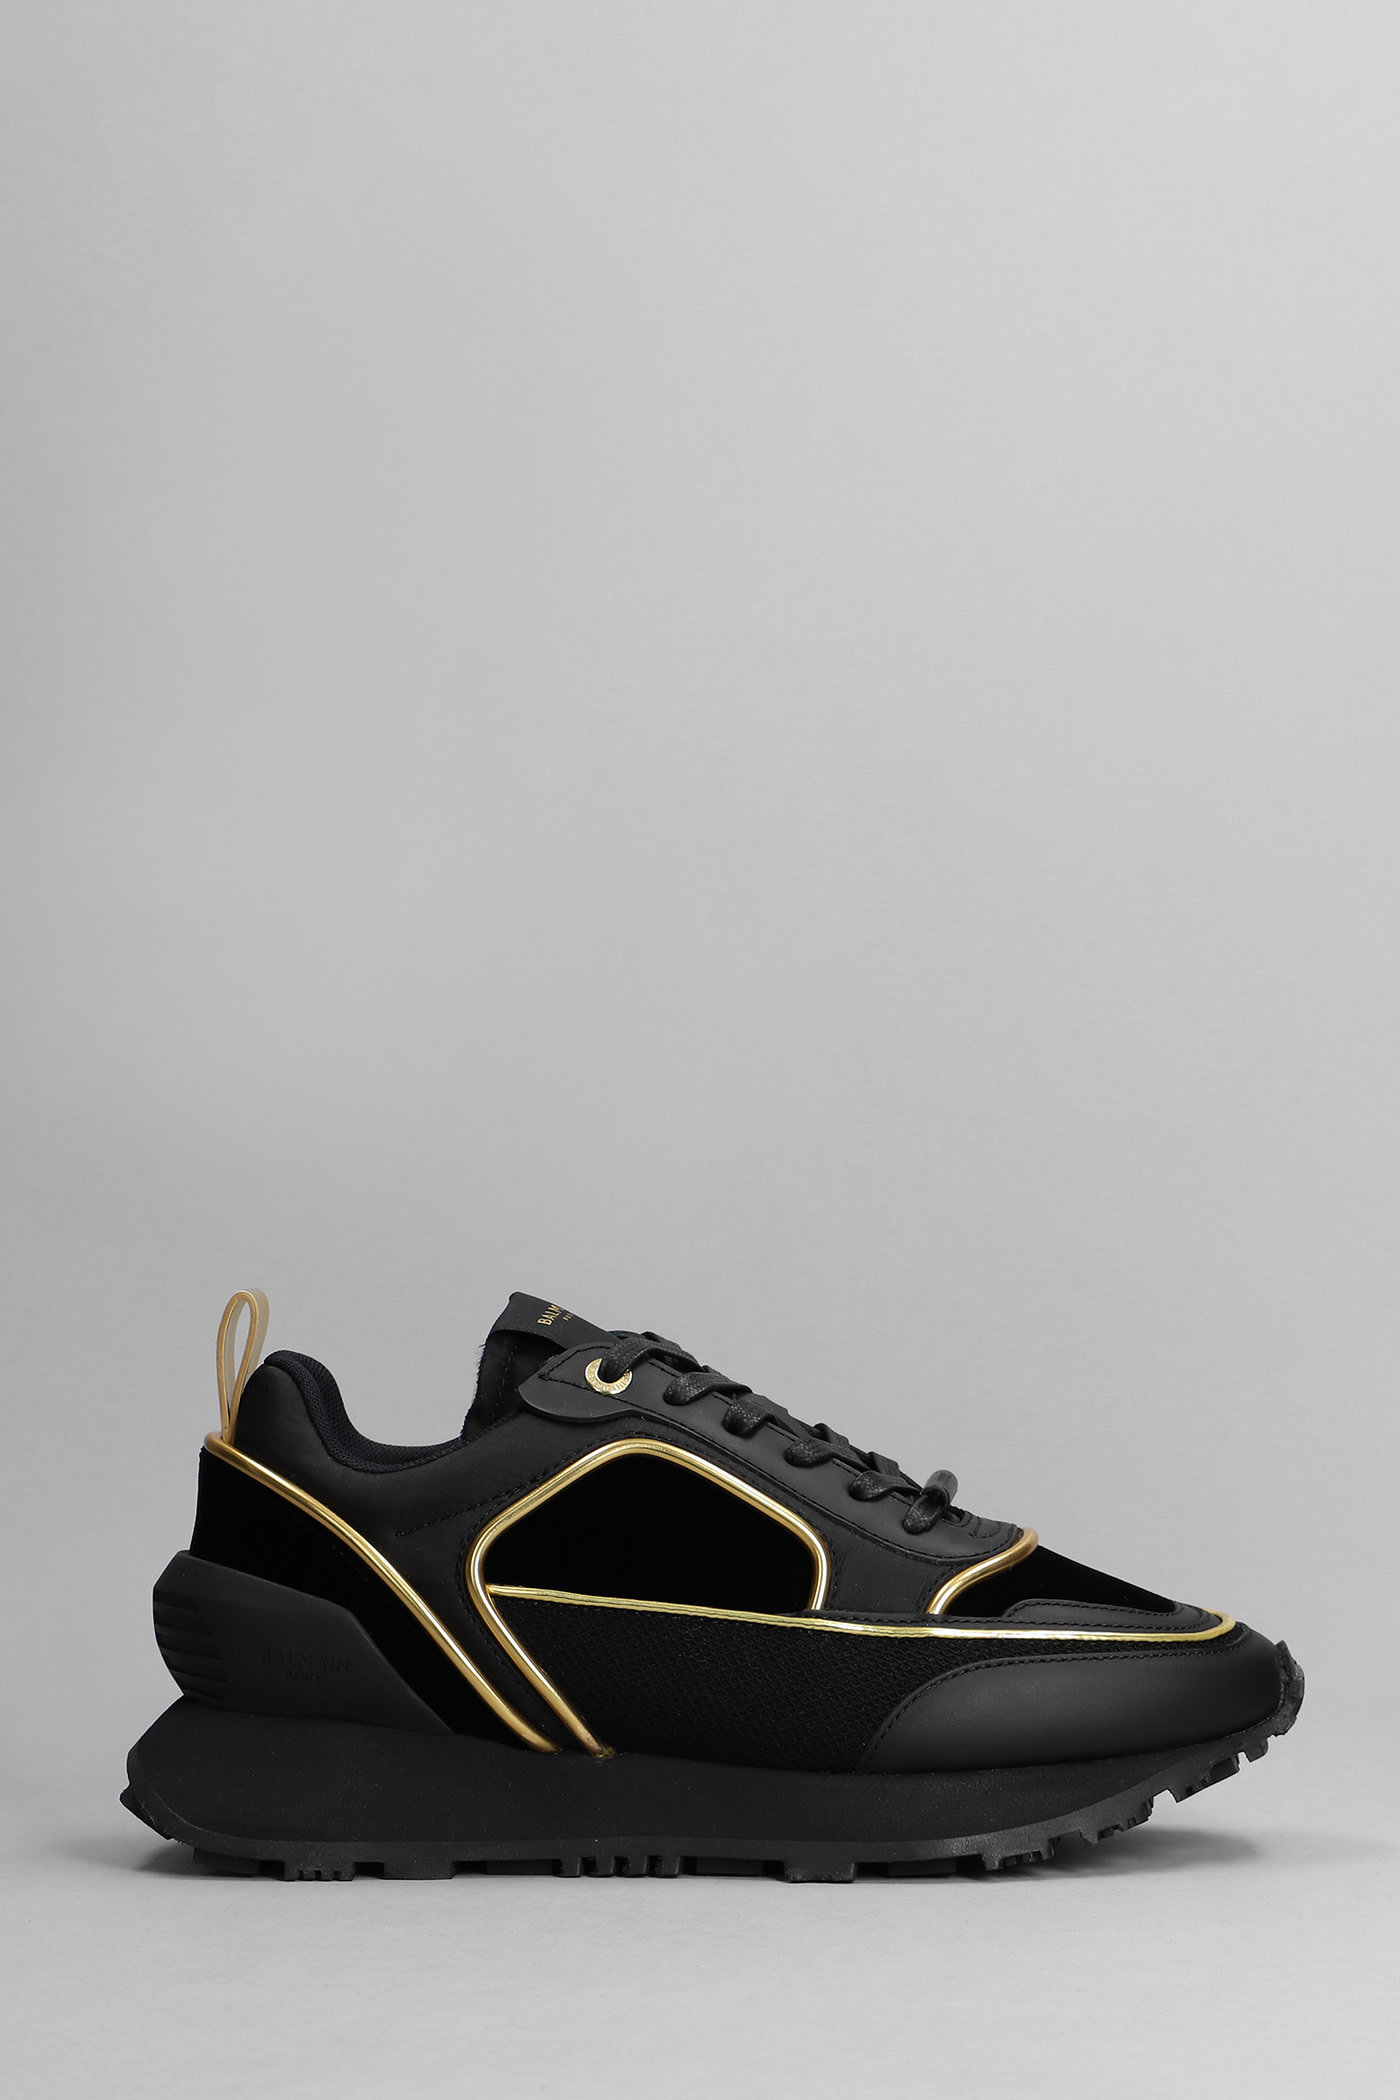 Balmain Sneakers In Black Suede And Leather